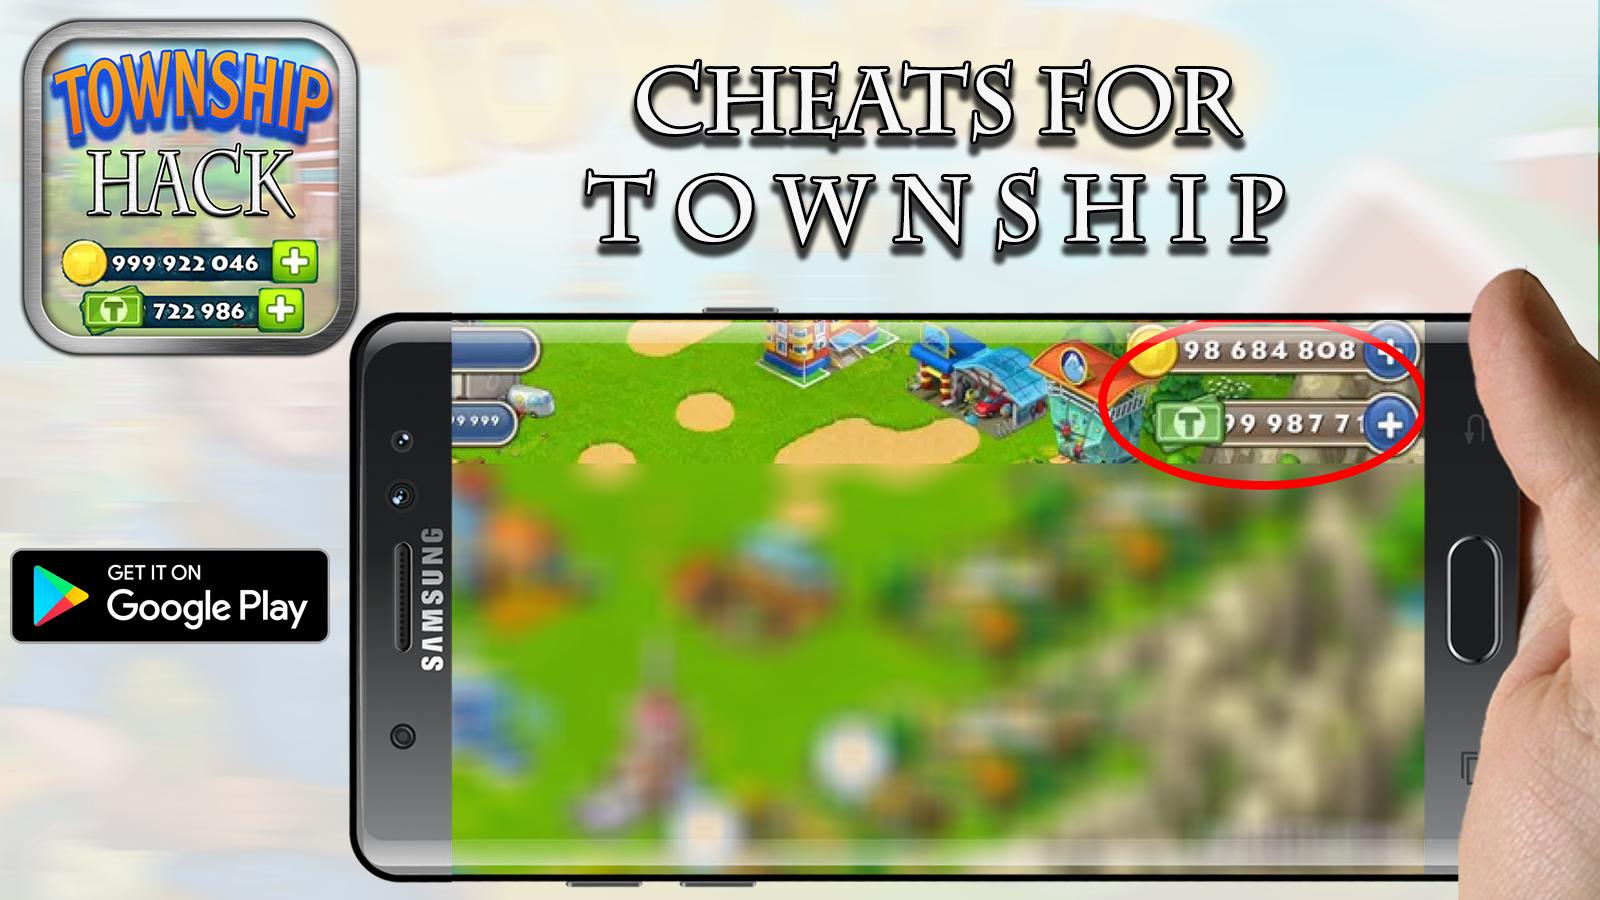 Hack For Township - New Prank! for Android - APK Download